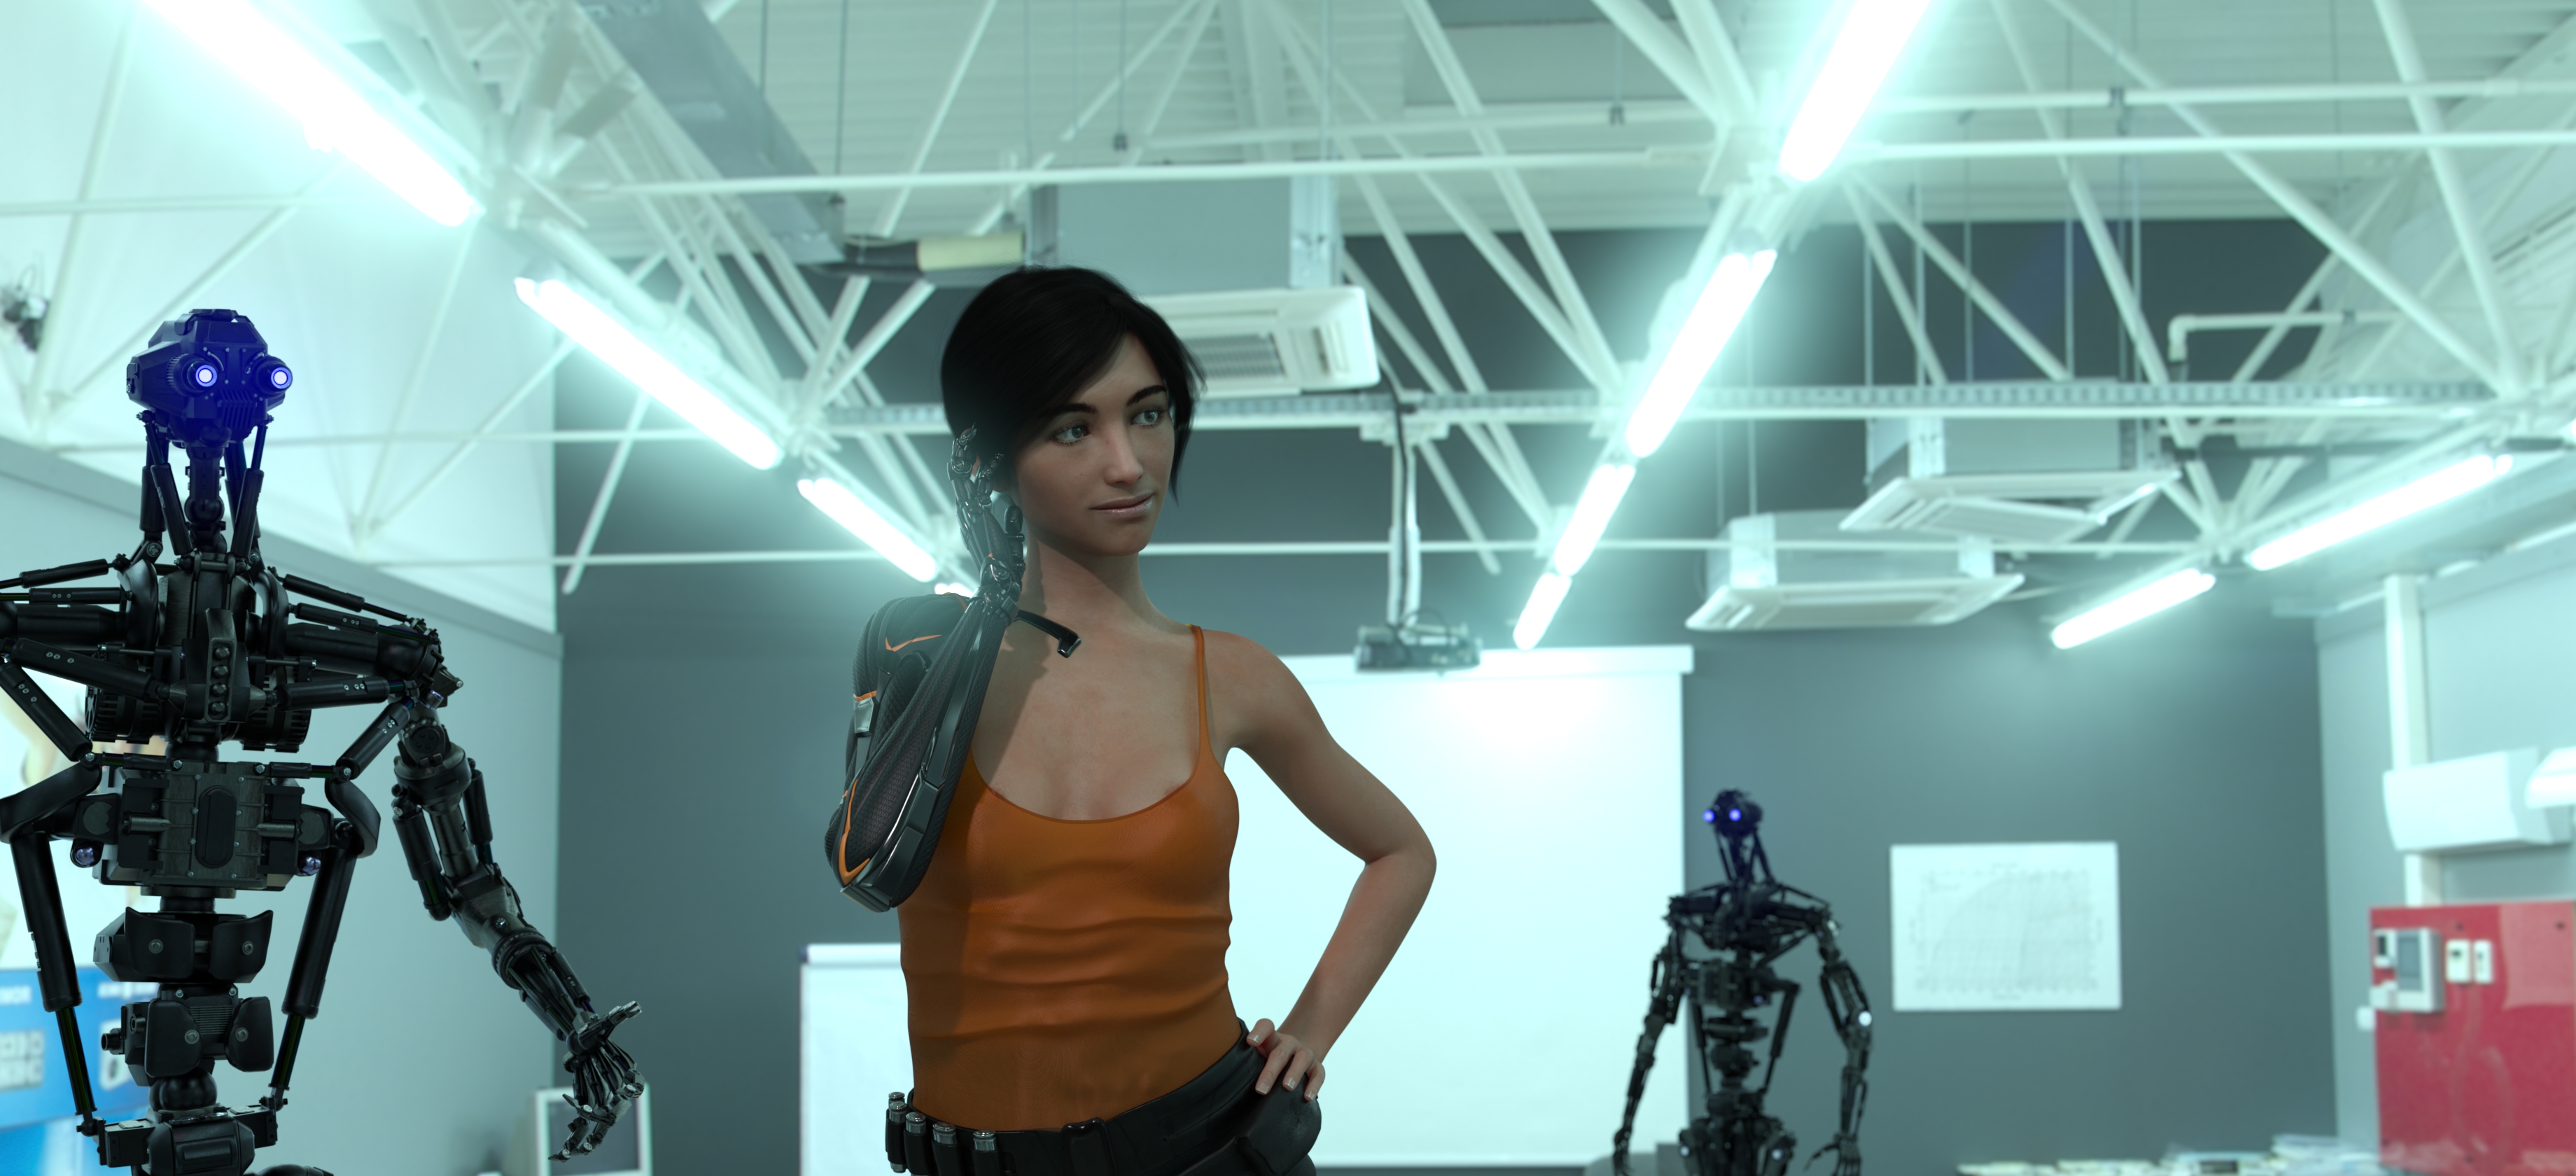 Sakirah Rodaun in Cyberchick short film during post recovery orientation with robot instructors.